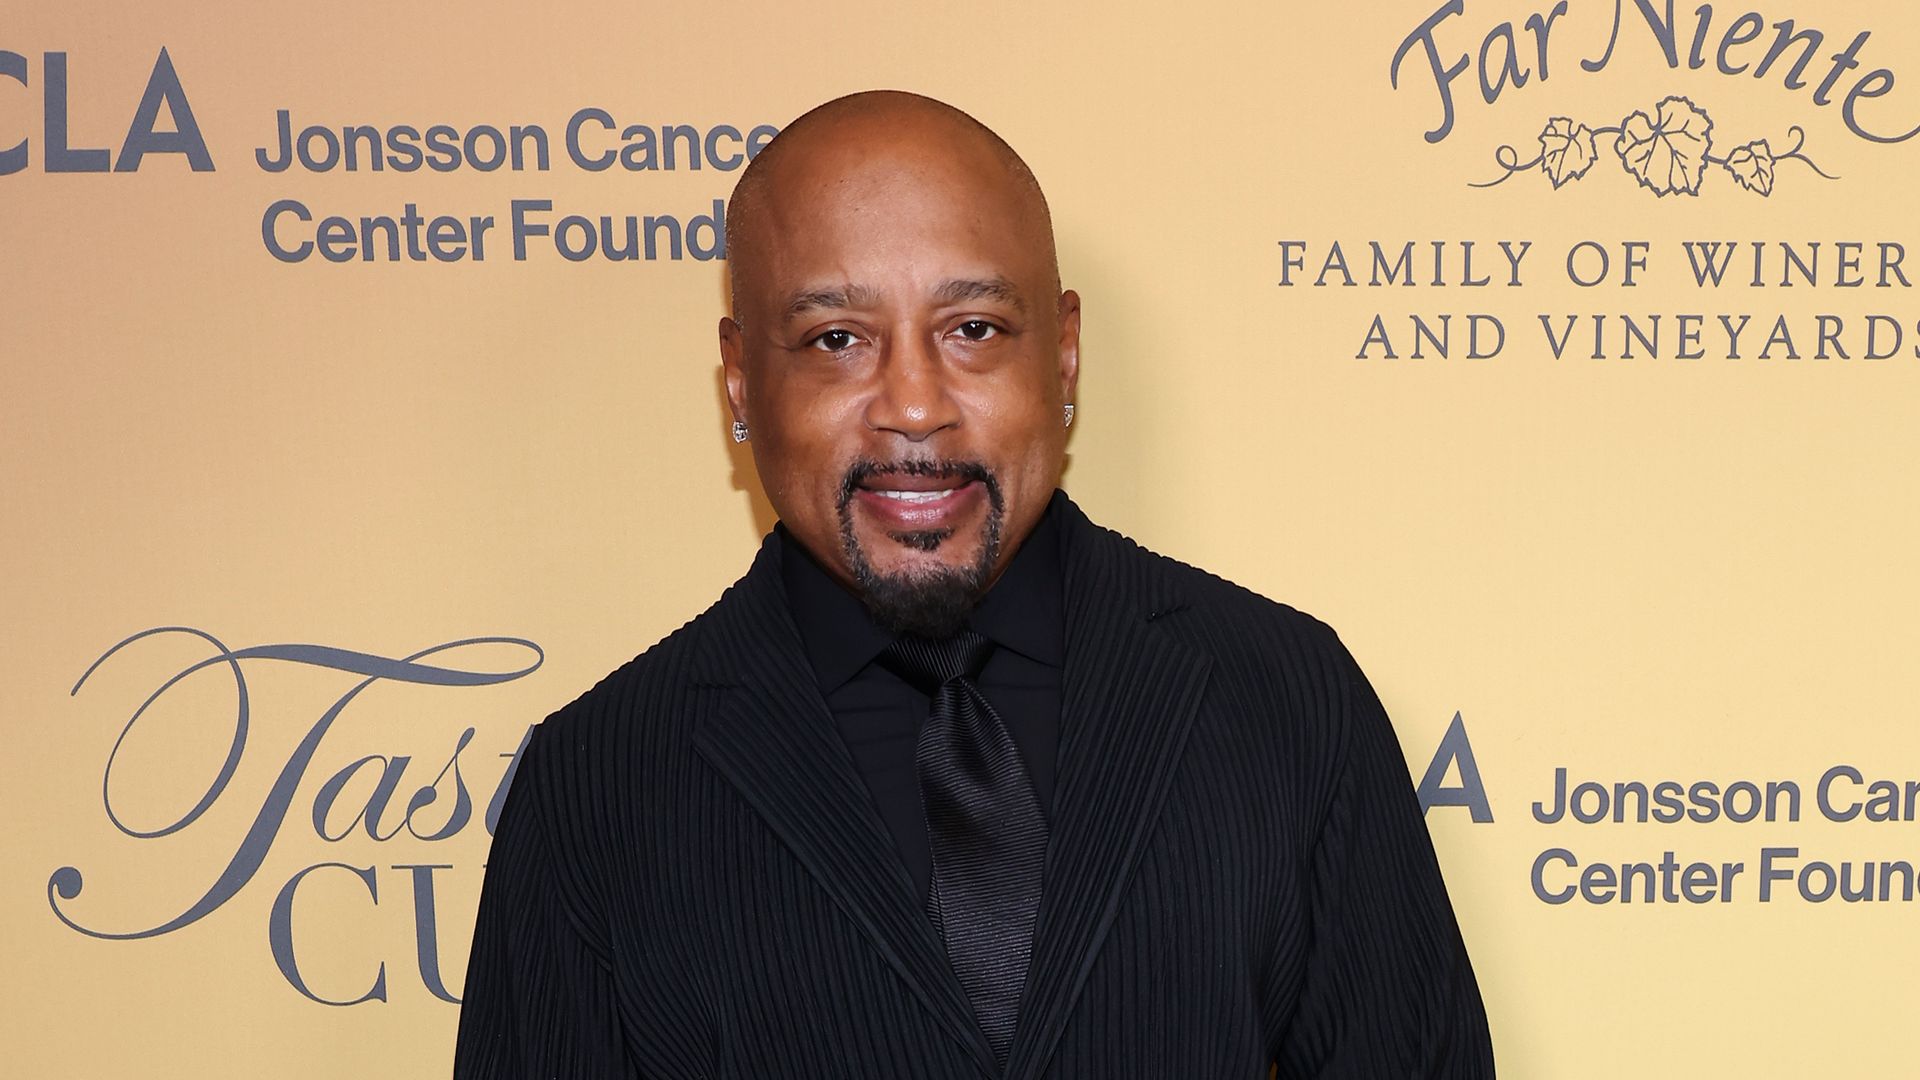 Daymond John attends the 26th Annual UCLA Jonsson Cancer Center Foundation's "Taste For A Cure" Event at Beverly Wilshire, A Four Seasons Hotel on April 28, 2023 in Beverly Hills, California